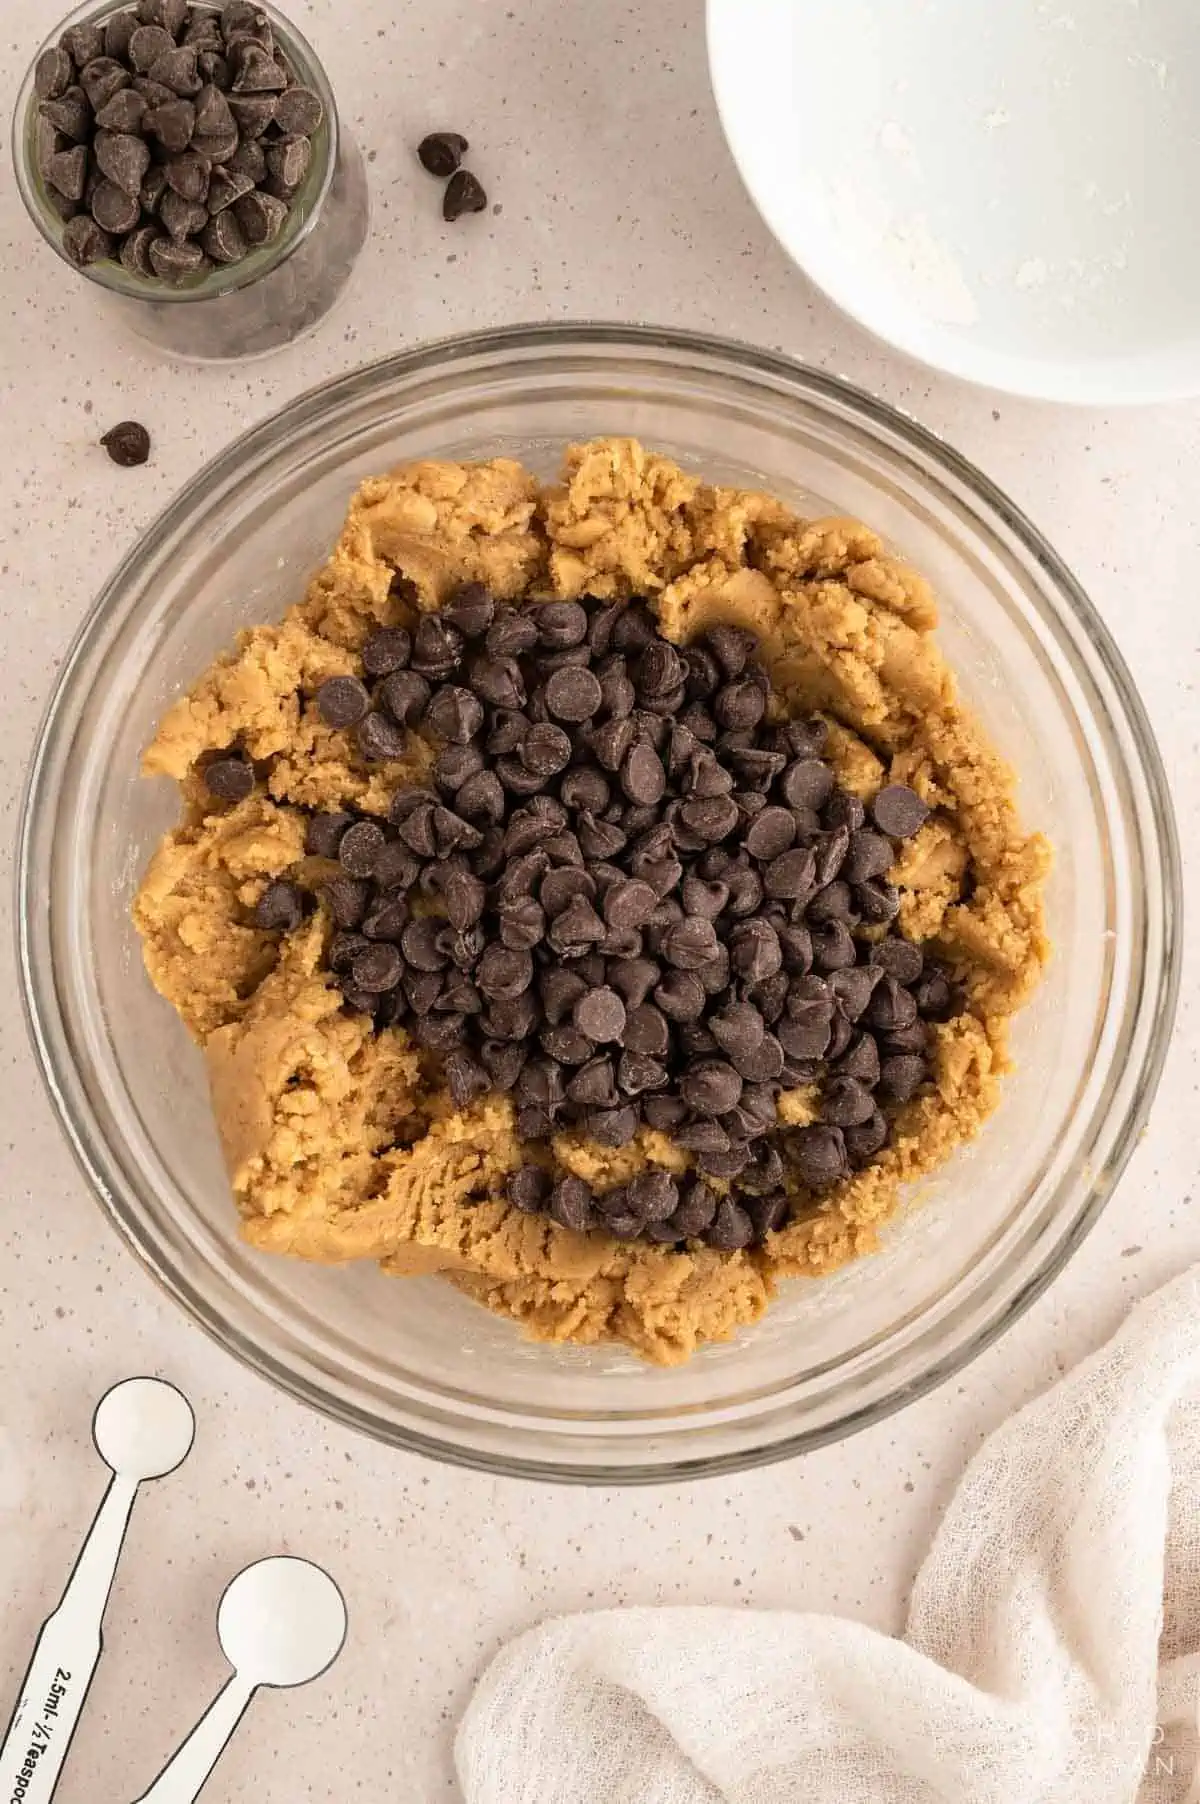 Chocolate chip cookie dough in a glass bowl with chocolate chips added in.